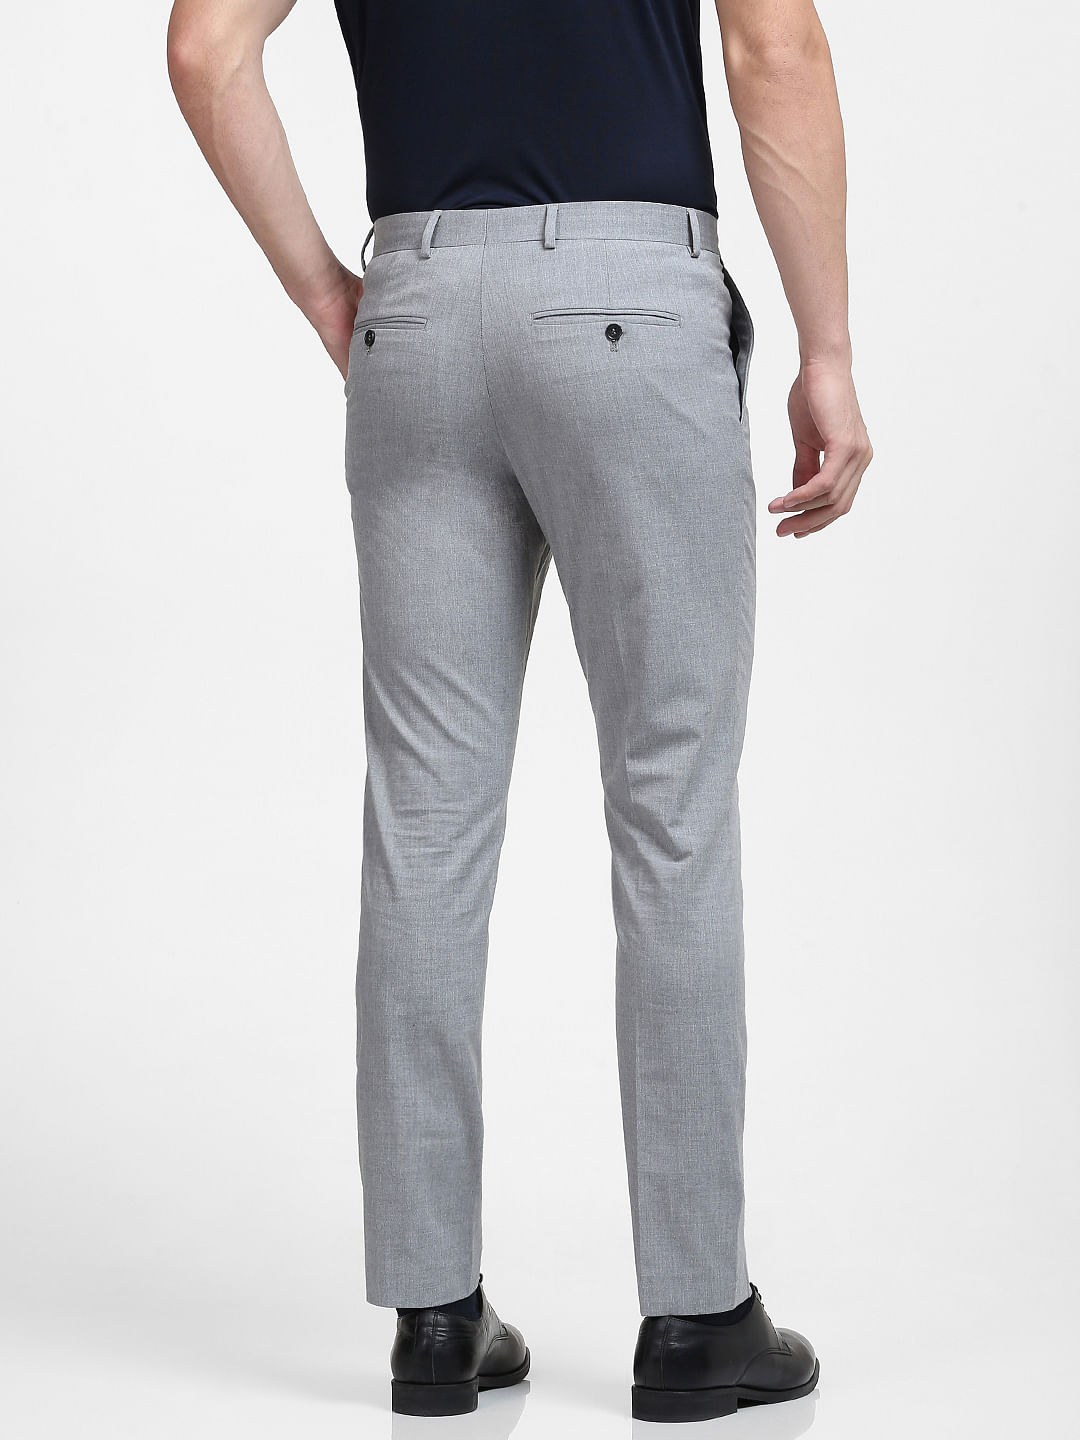 Business trousers for him | HUGO BOSS | Comfortable and Elegant